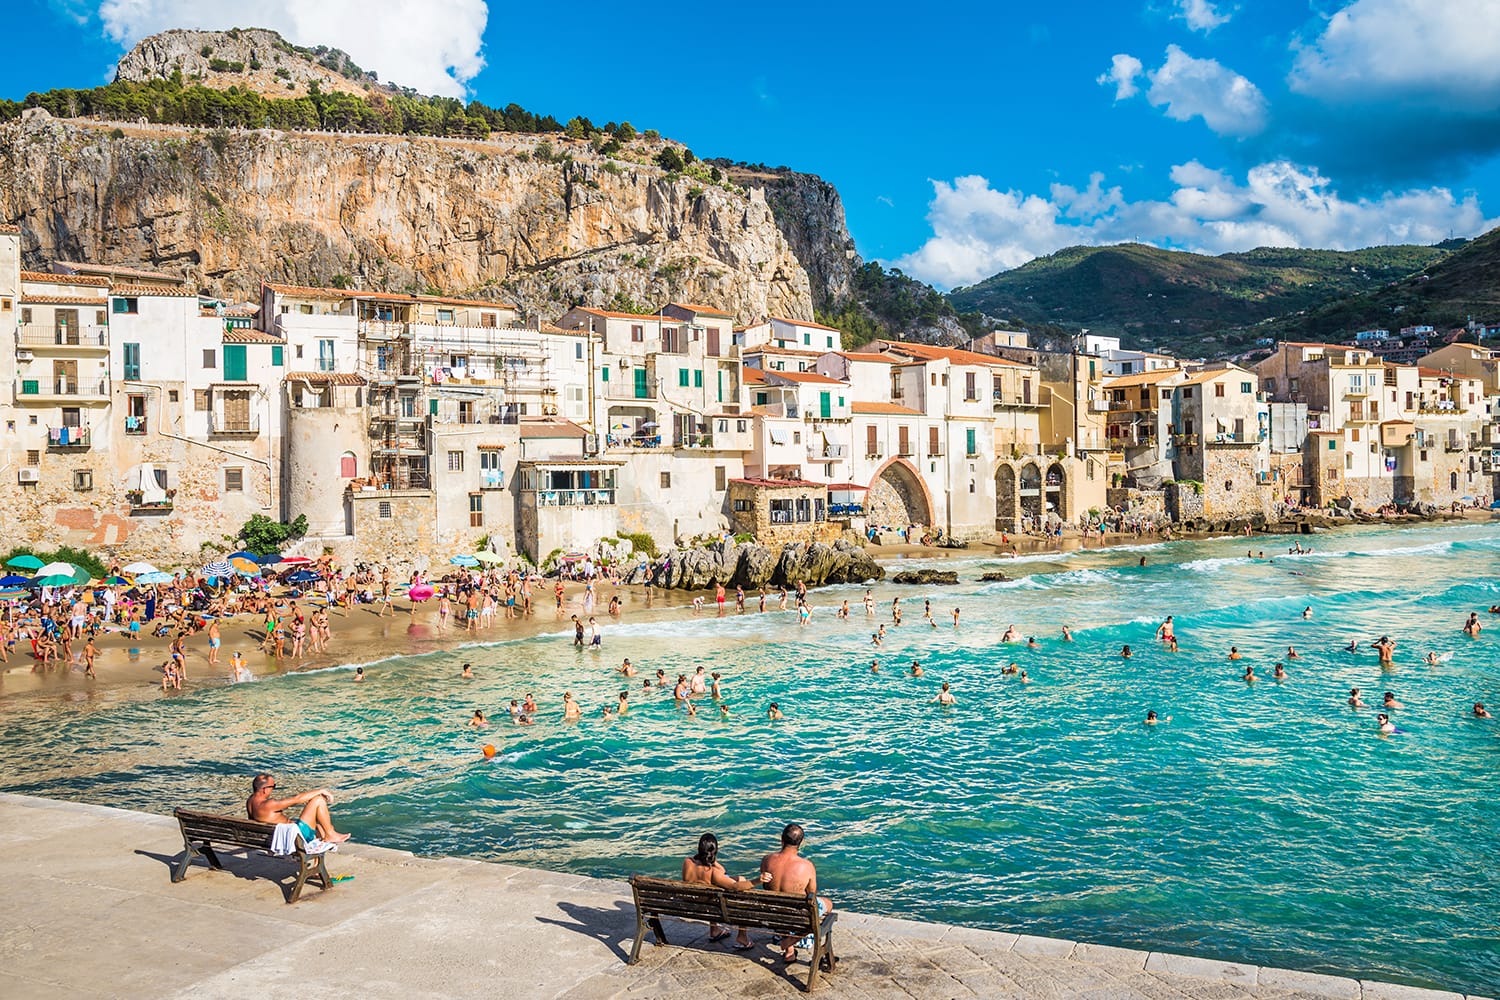 People on beautiful beach at the bay in Cefalu, Sicily